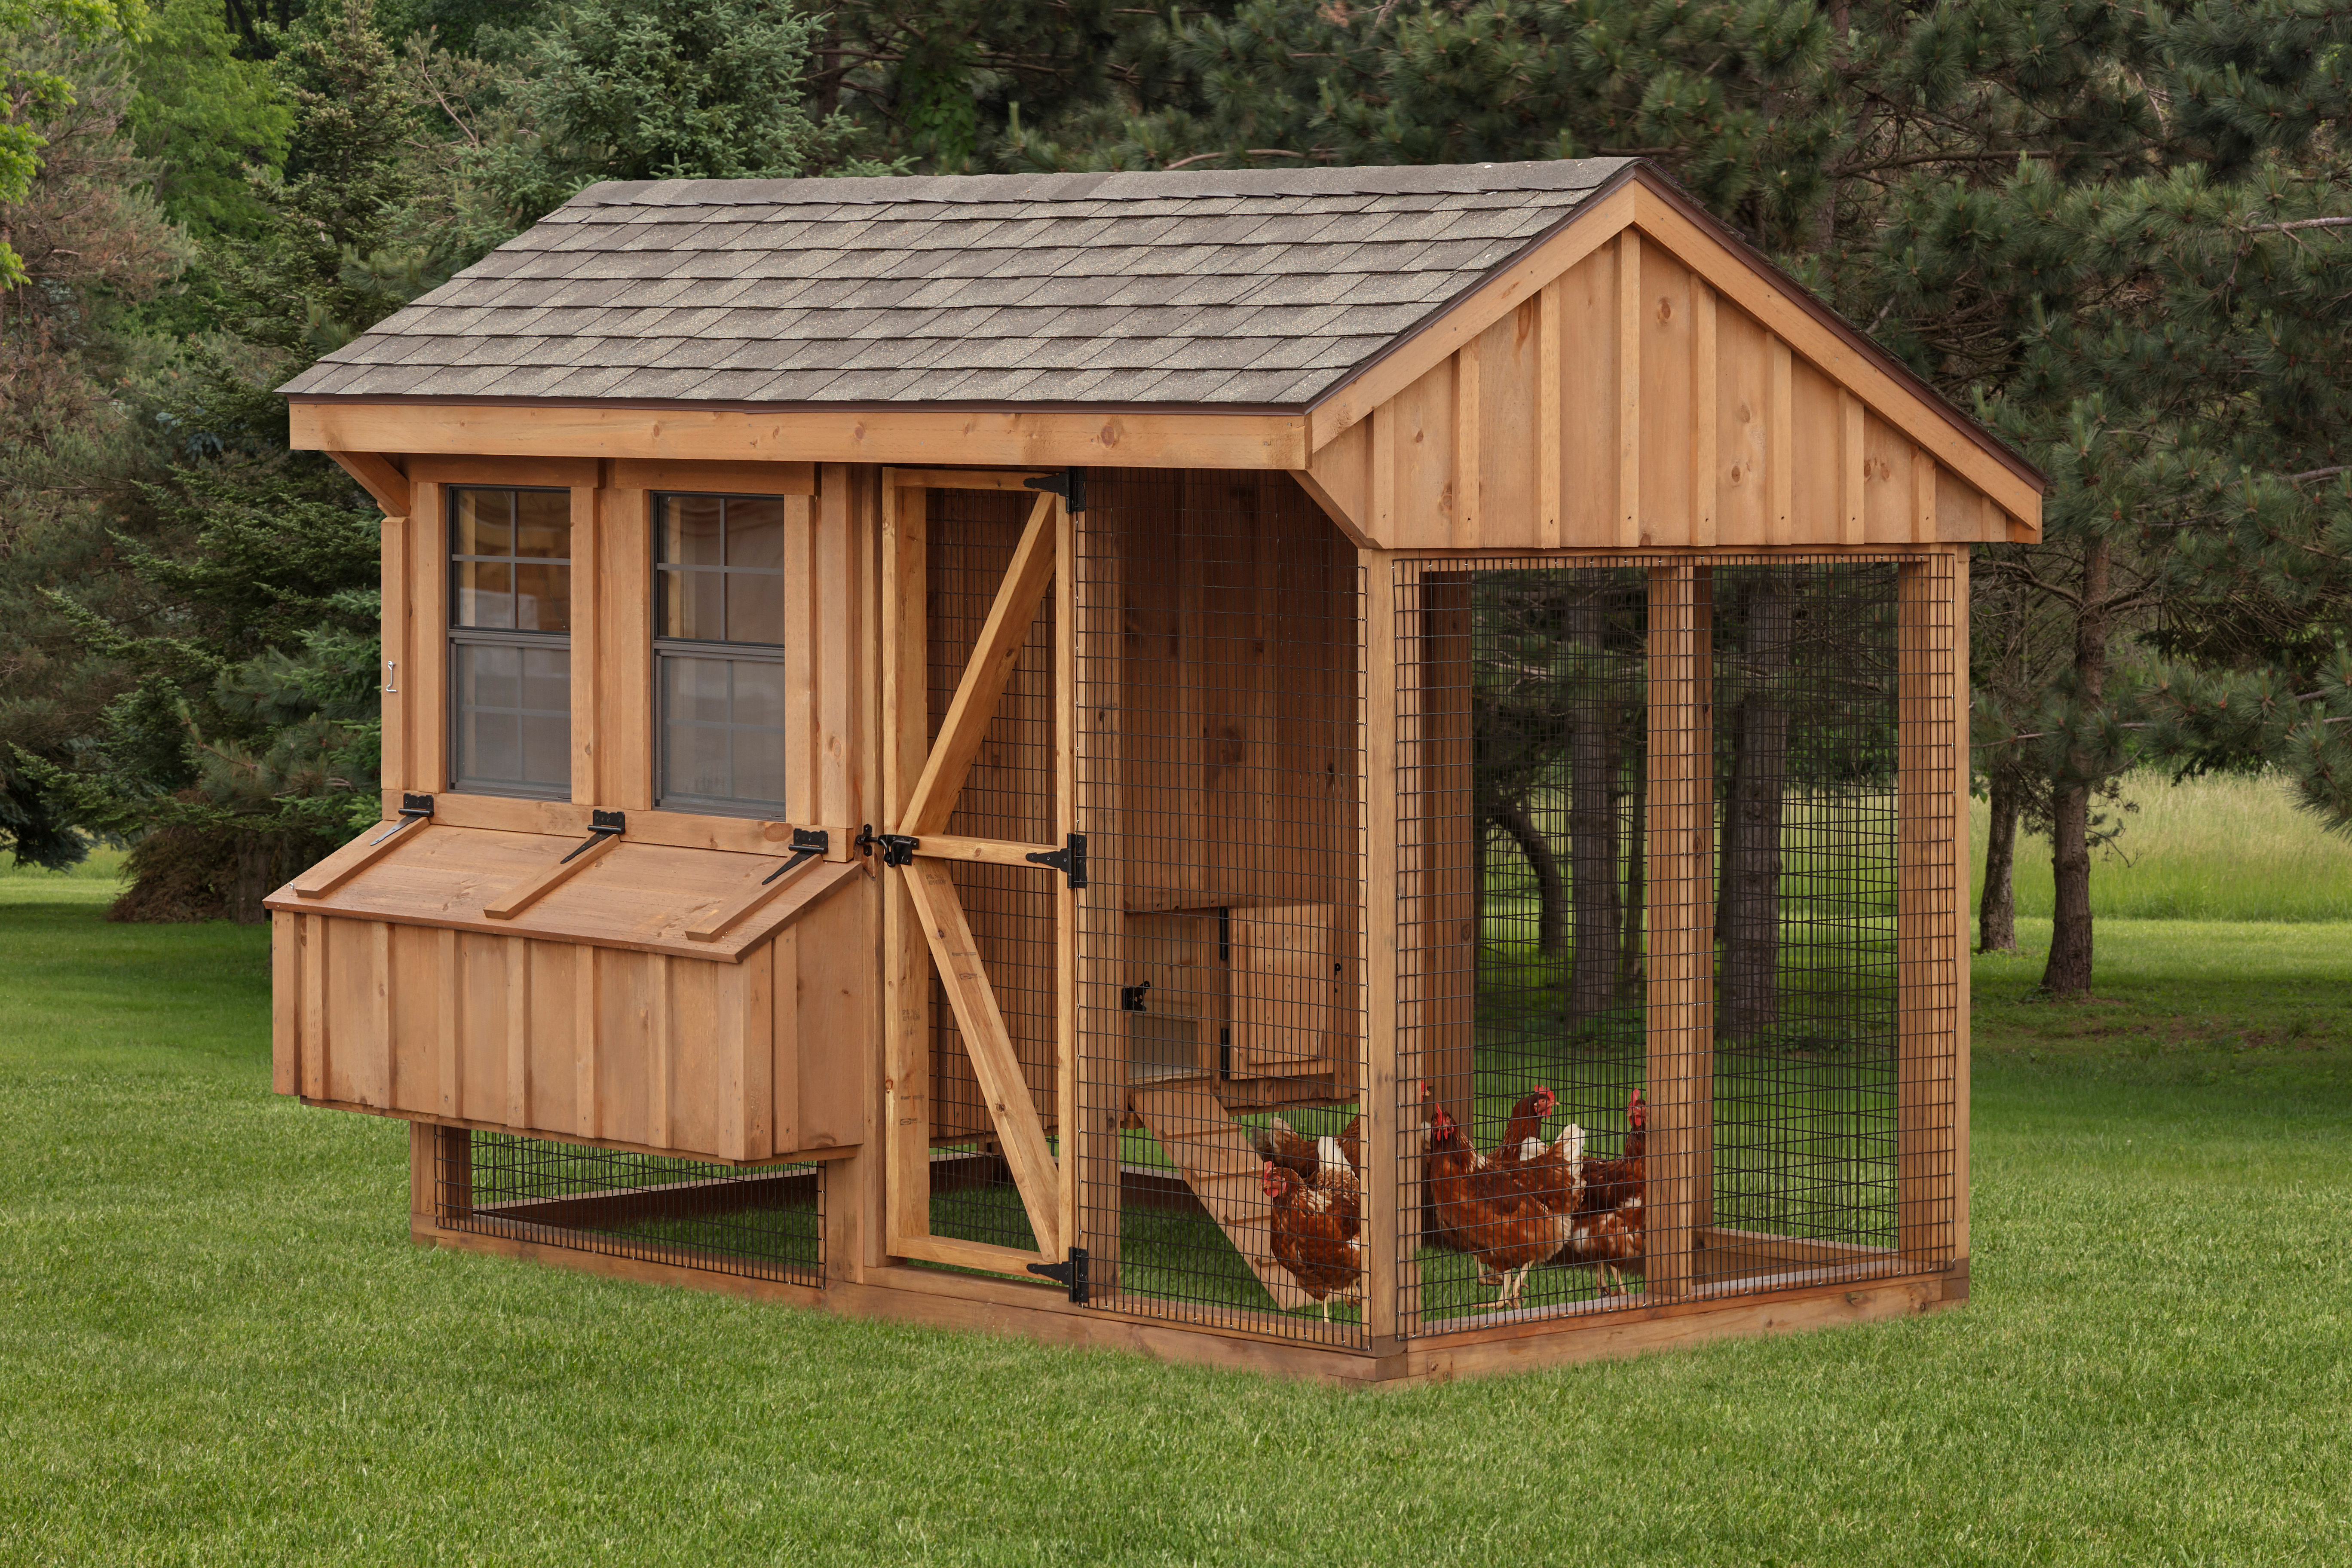 In-Stock Chicken Coops Sale - Ready to Ship | Buy Amish ...